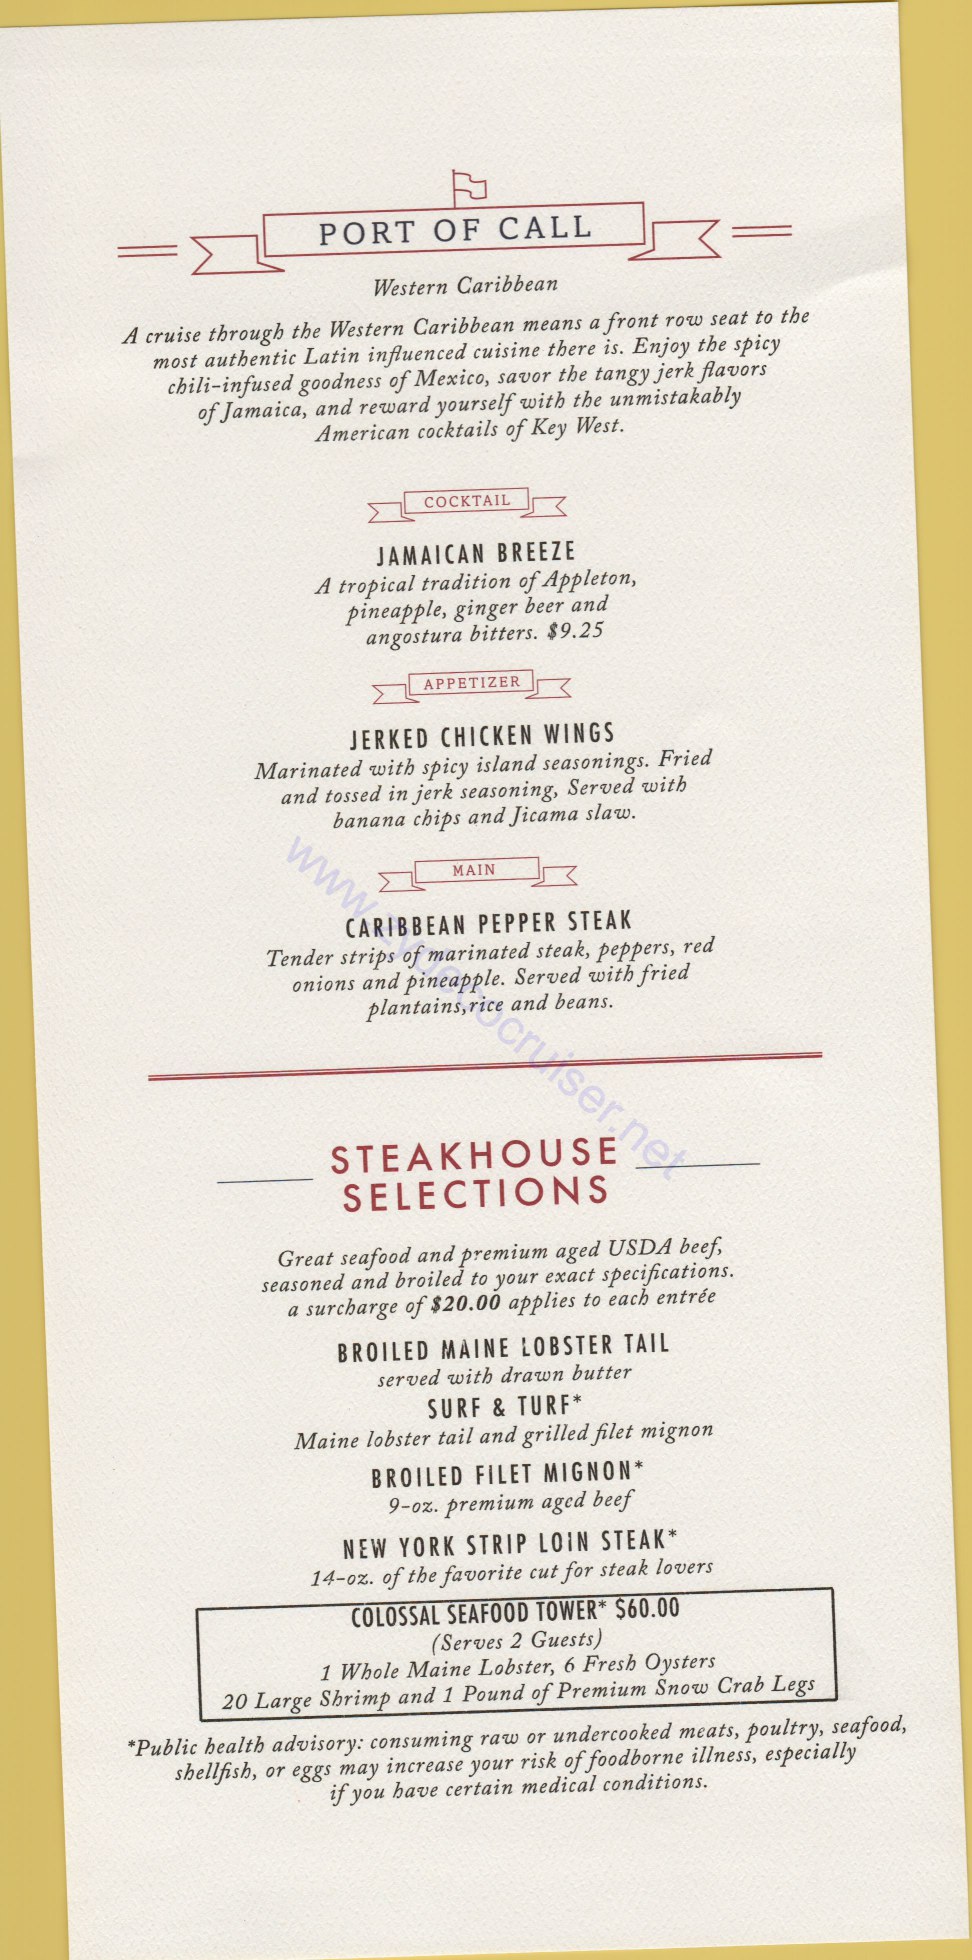 Carnival Horizon Day 11 MDR Dinner Sea Day 6 Port of Call Menu